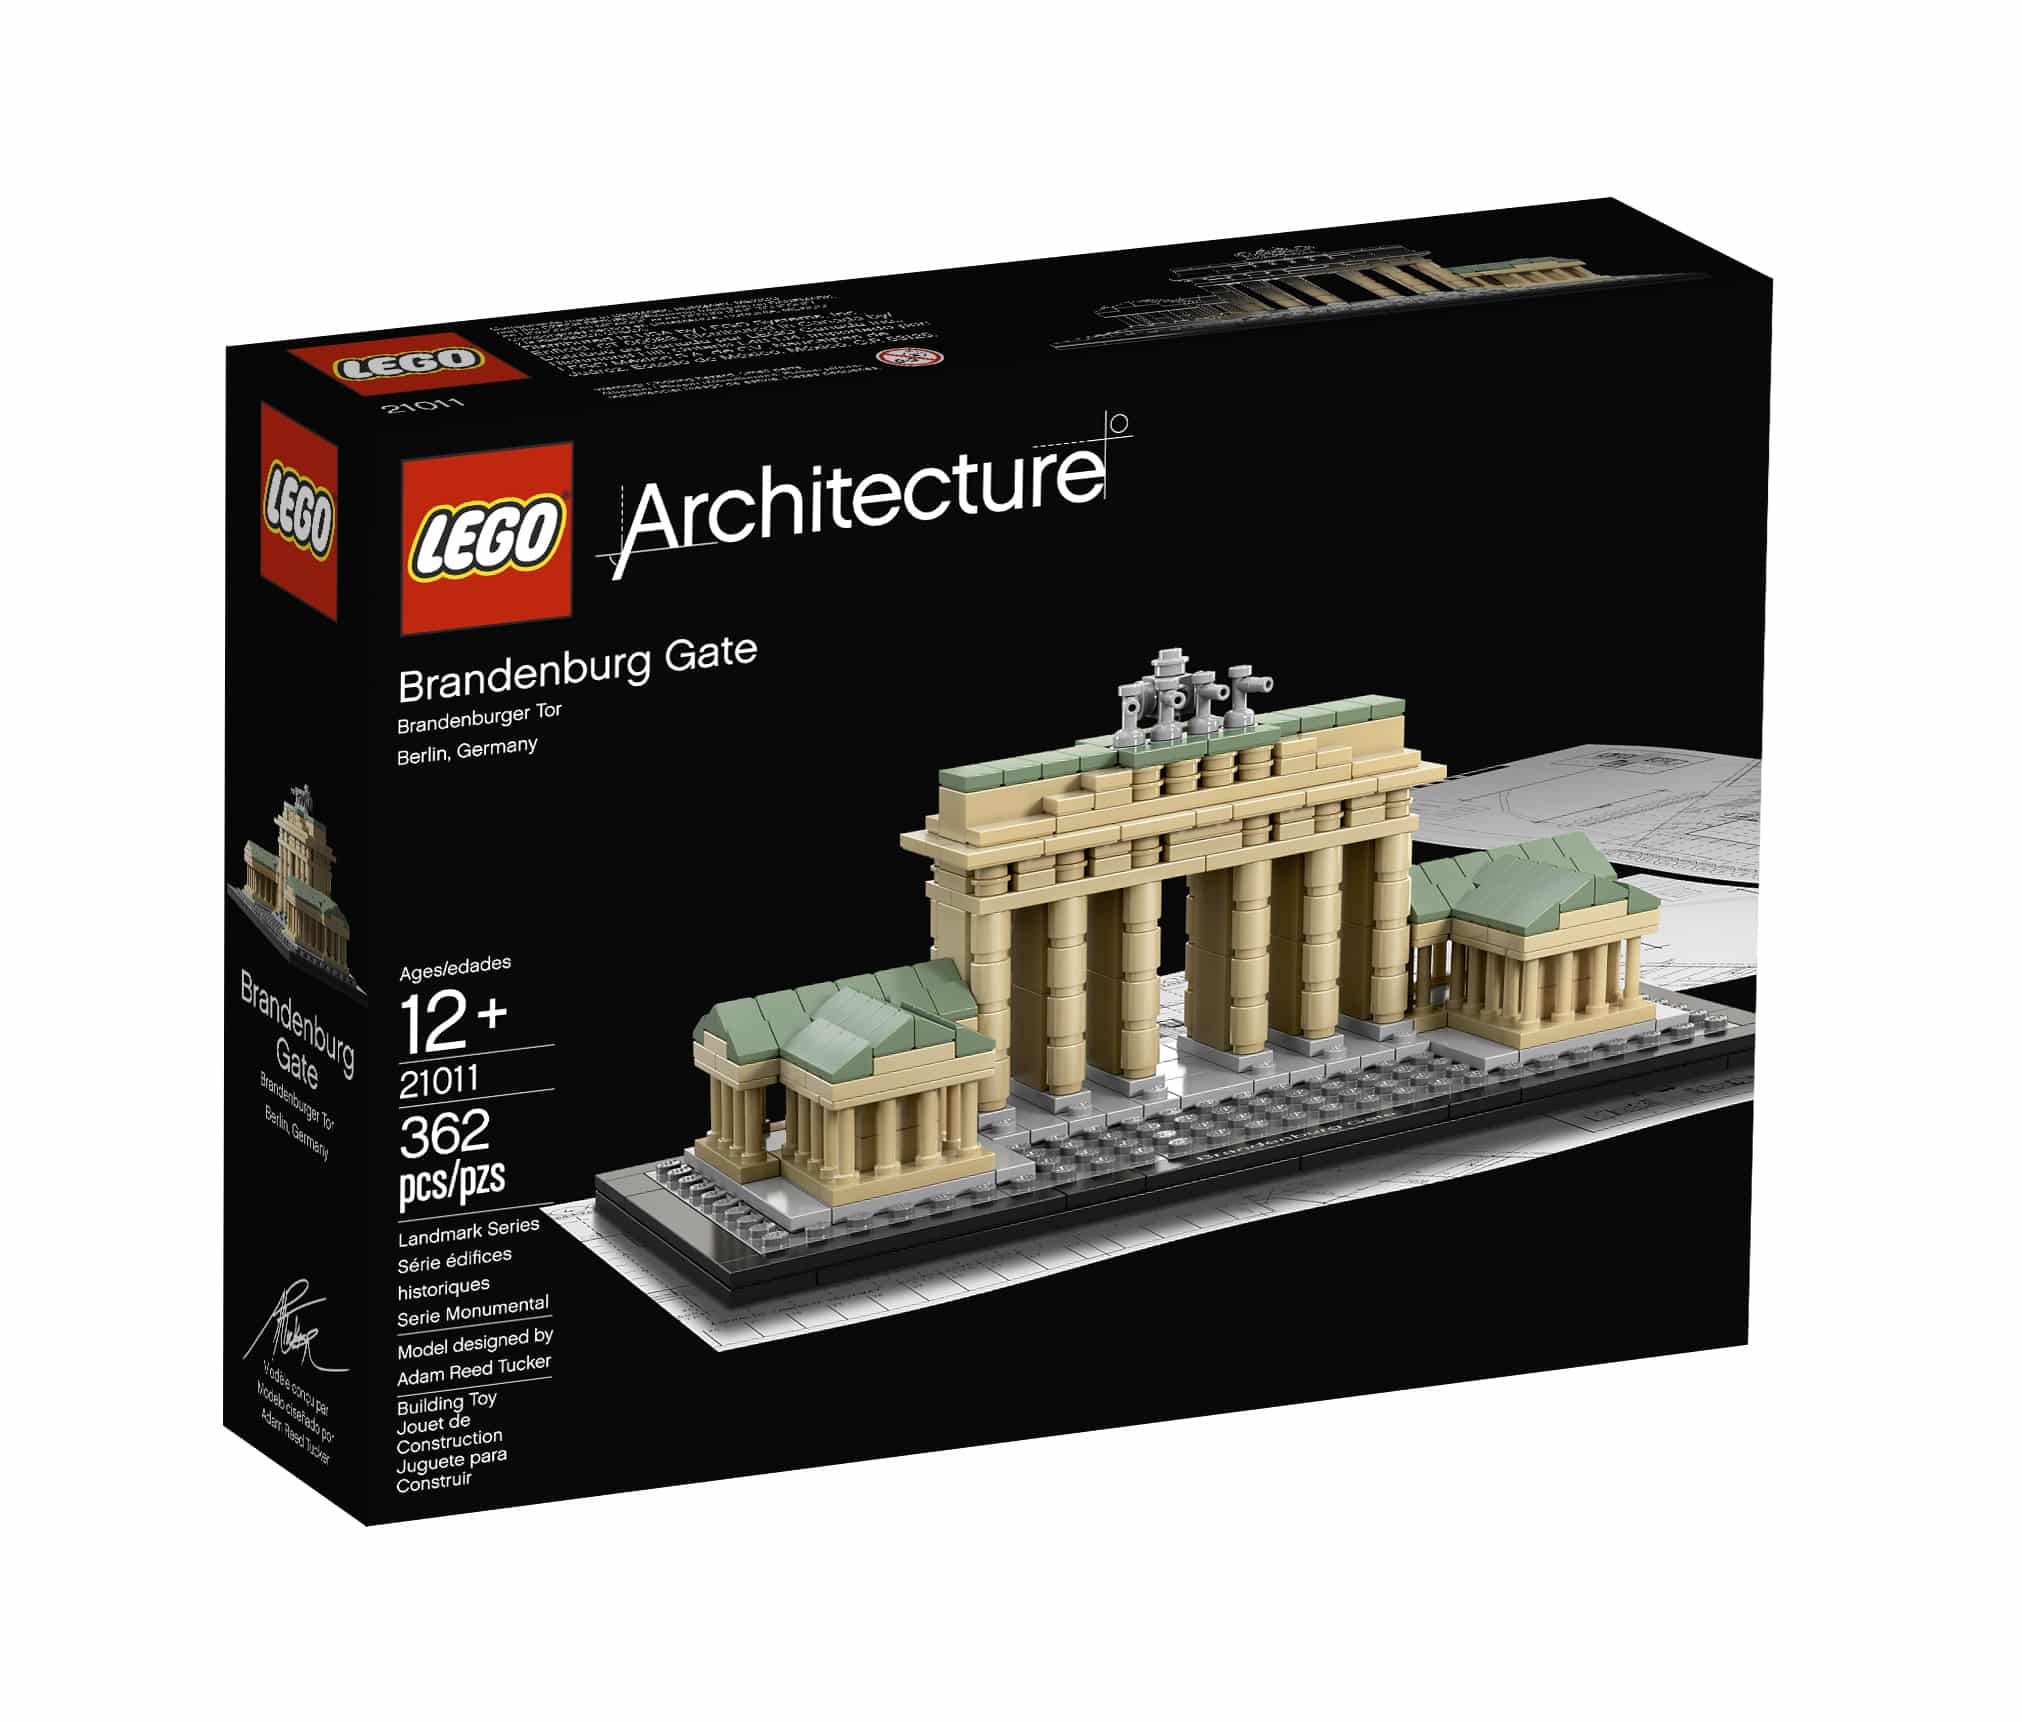 Lego Architecture Sets enthalten berühmte Bauwerke wie etwa das Brandenburger Tor. Bildquelle: ©2022 The LEGO Group. All rights reserved. LEGO and the LEGO logo are trademarks and/or copyrights of the LEGO Group.